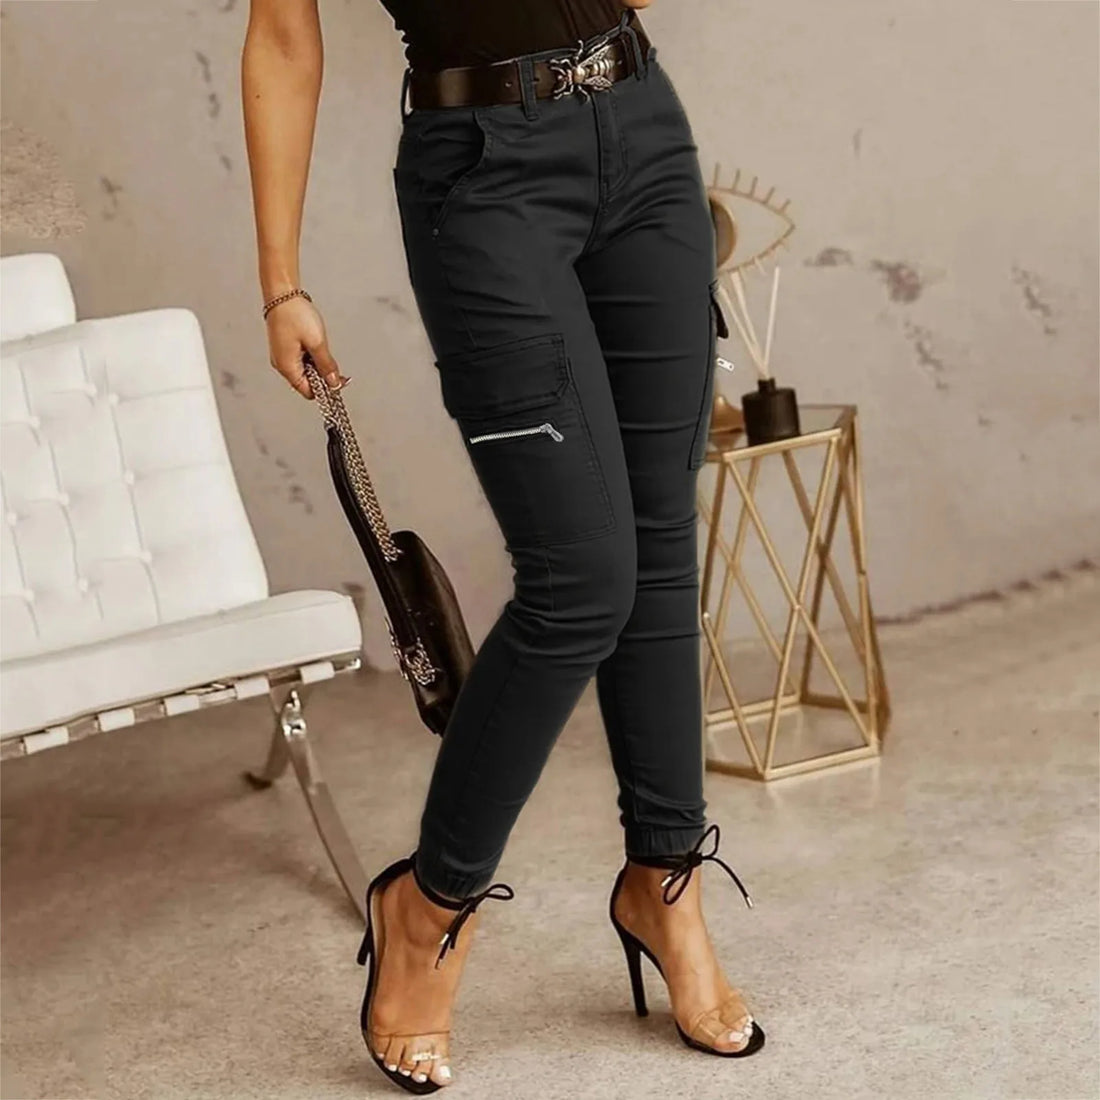 Y2K Pants Women Cargo Pants With Pockets Sweatpants Streetwear Ladies Casual Solid Color Slim Fit Trousers Pantalones De Mujer - Fashionqueene.com